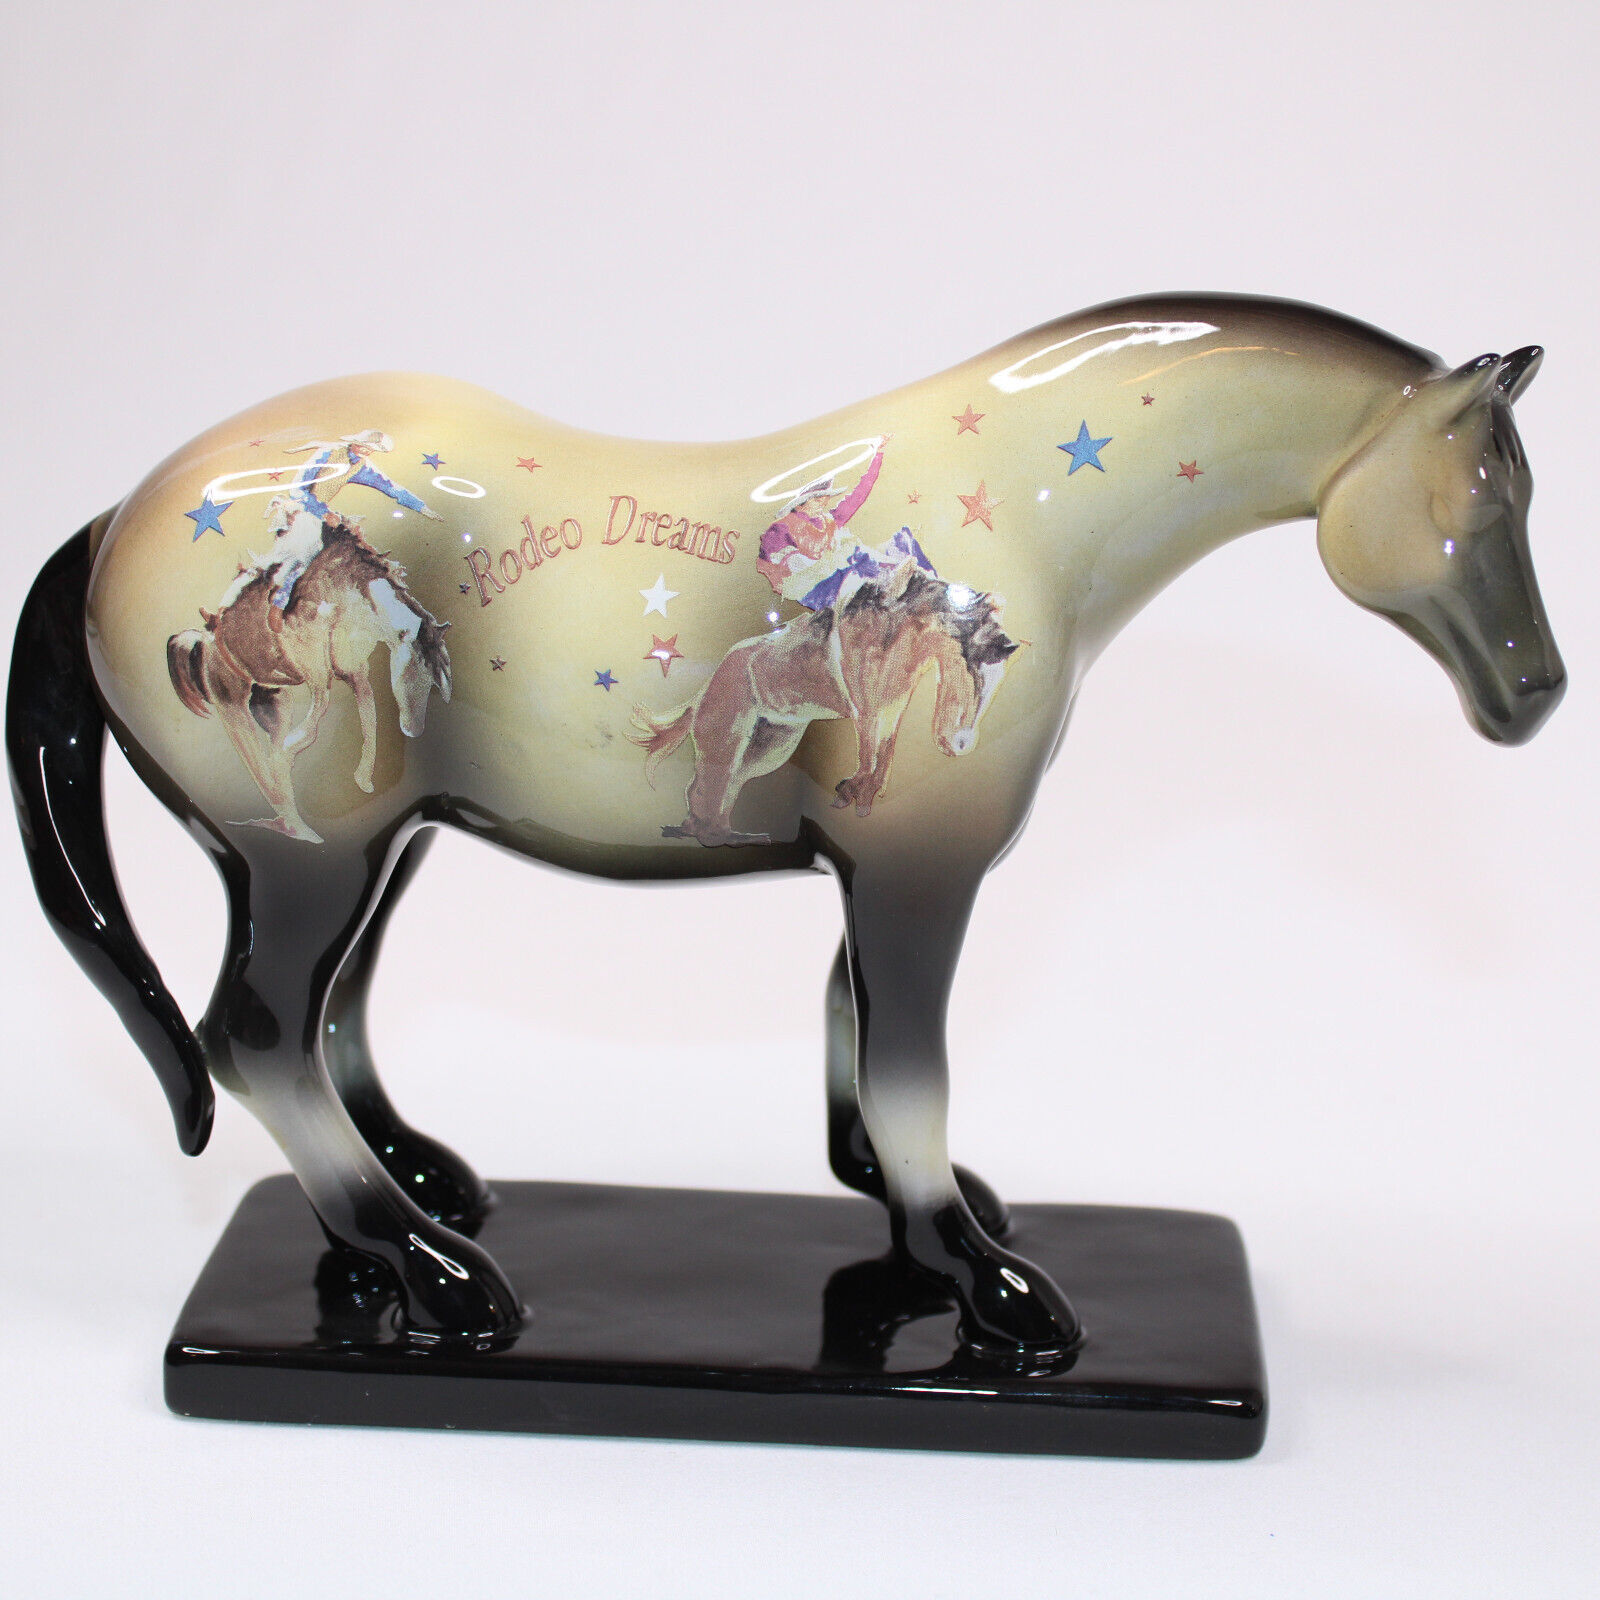 RODEO DREAM Trail Of Painted Ponies By Westland 12213 Western Horse Figurine - $24.00